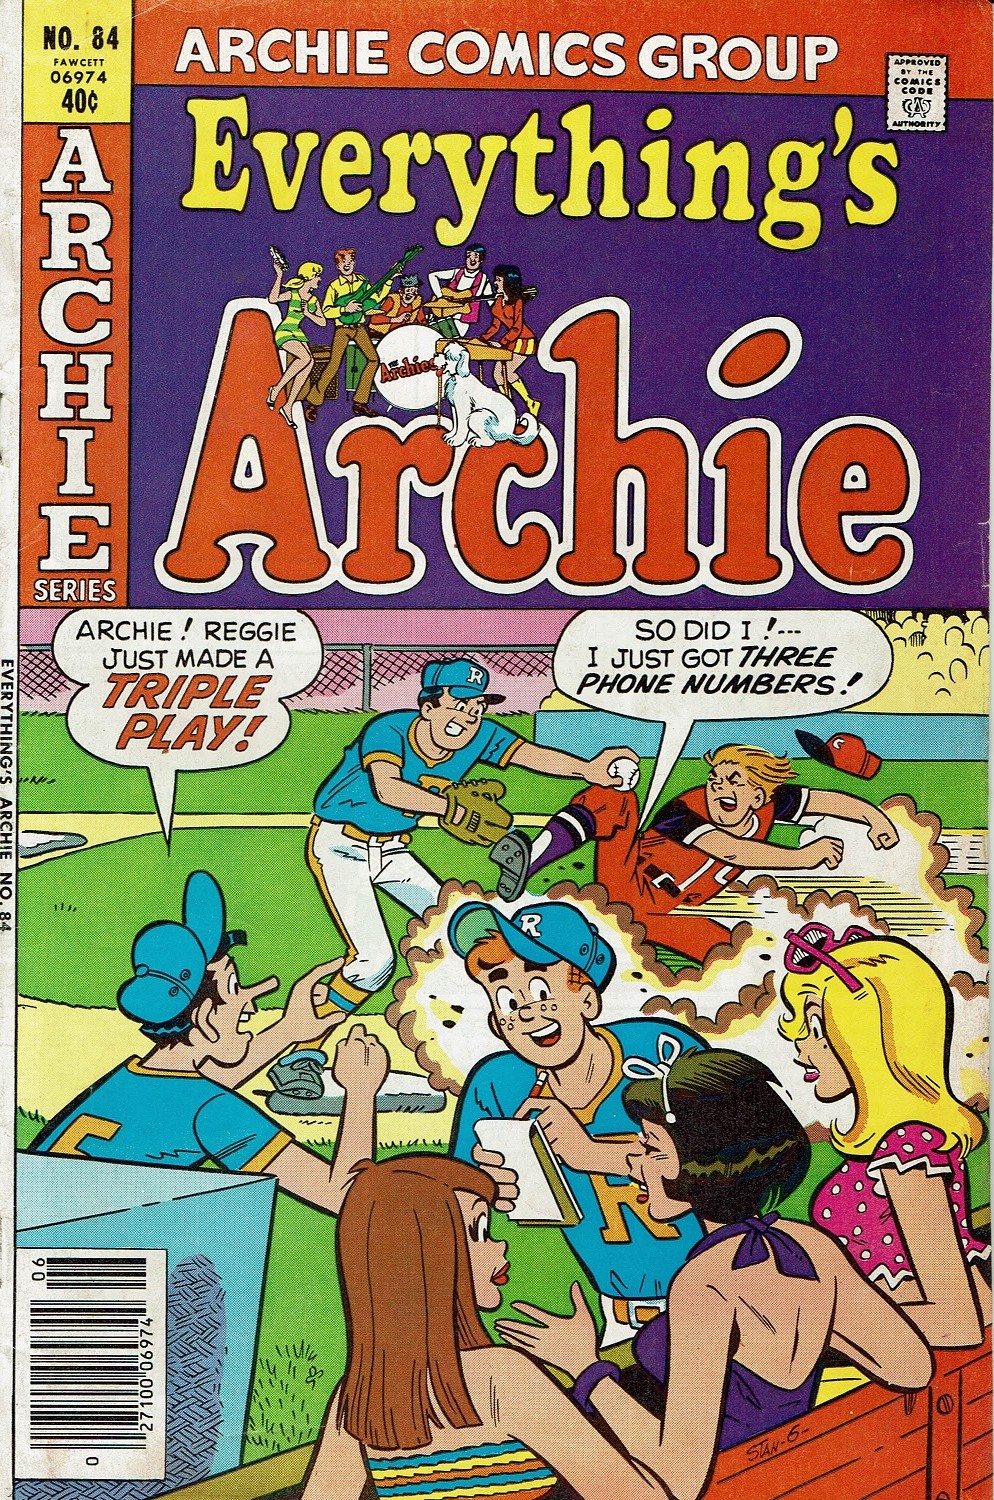 Read online Everything's Archie comic -  Issue #84 - 1